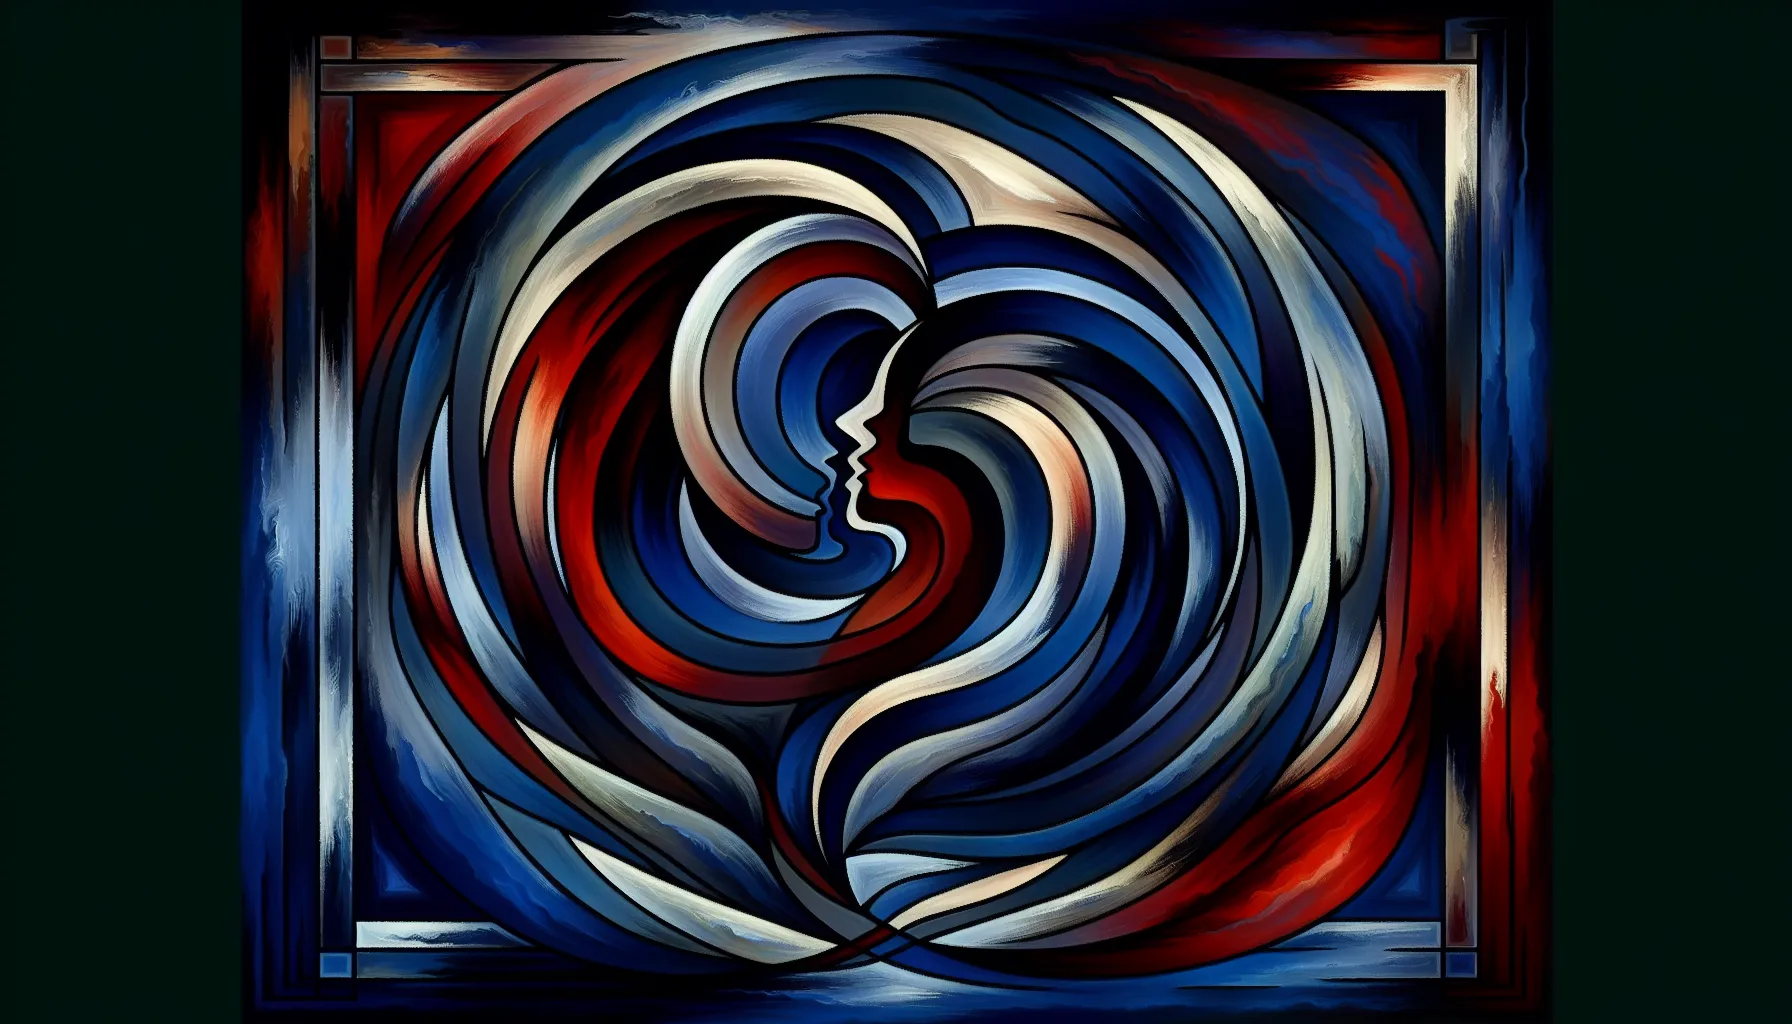 <strong>Entwined Emotions:</strong> Like the mingling shades of uncertainty and passion, this image reflects the enigmatic dance of human connection, where signals intertwine and emotions ebb and flow in the quest for understanding.